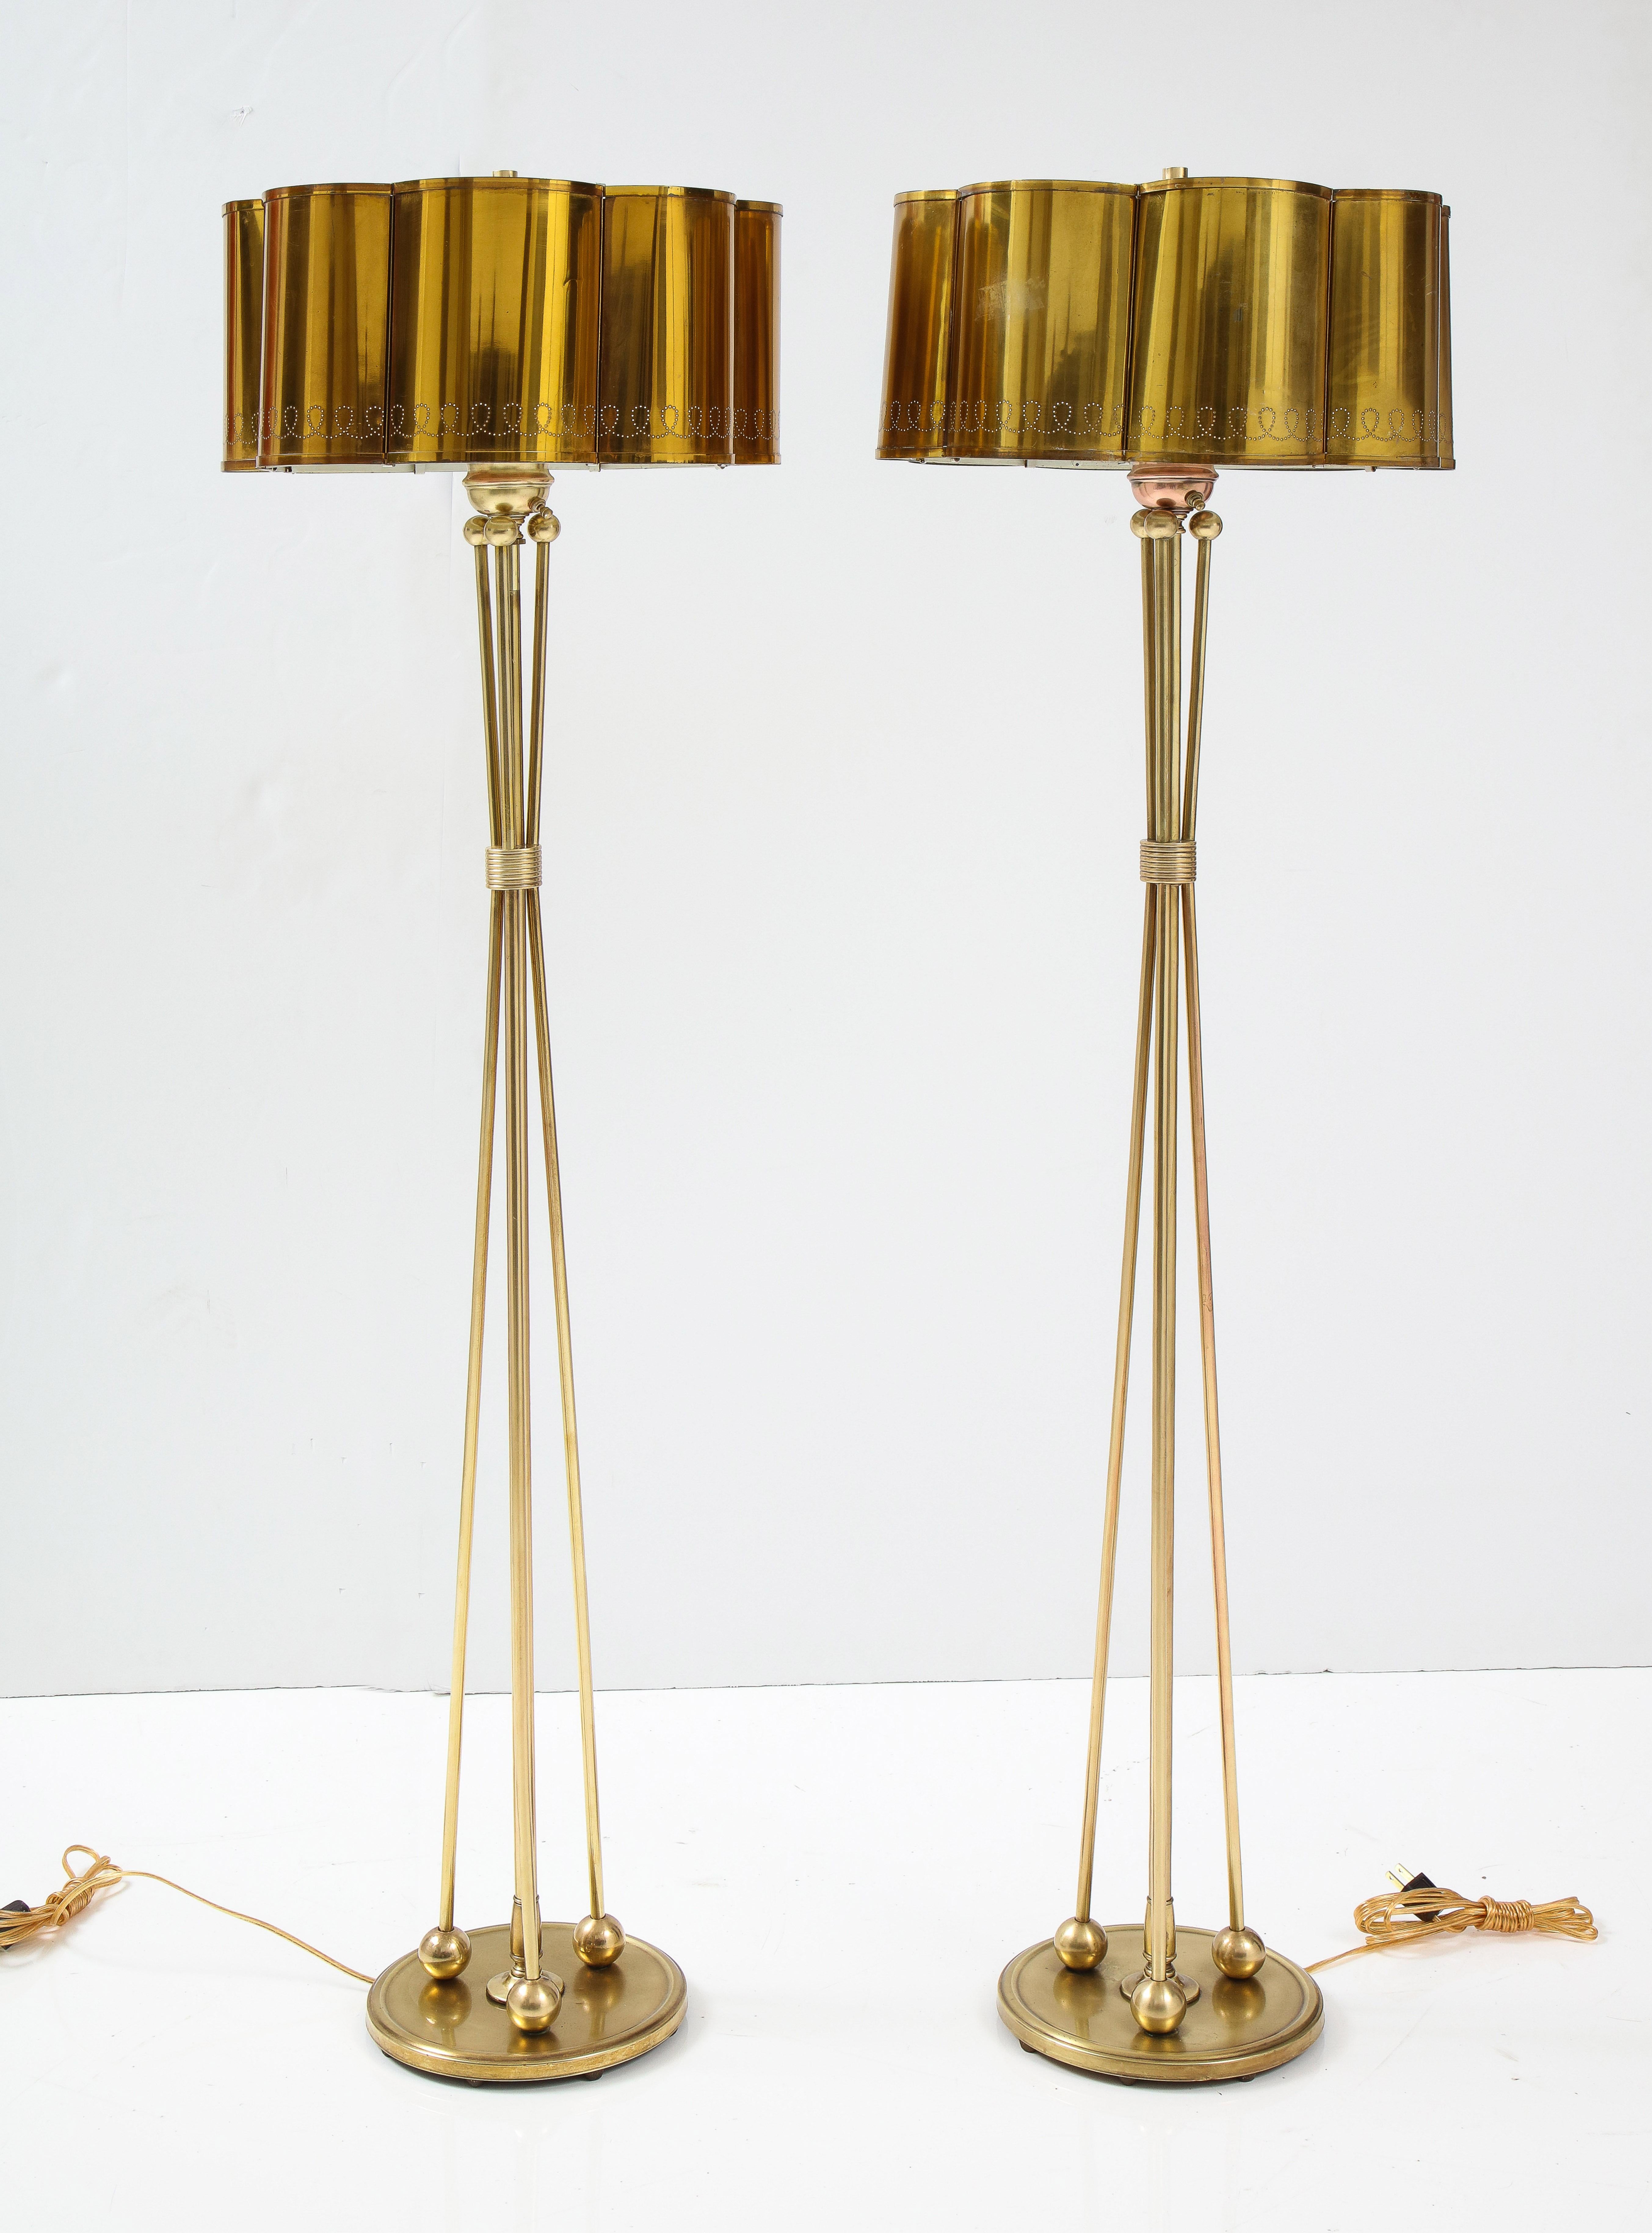 1950's French Solid Brass with Perforated Lamps Shades Tripod Floor Lamps 6